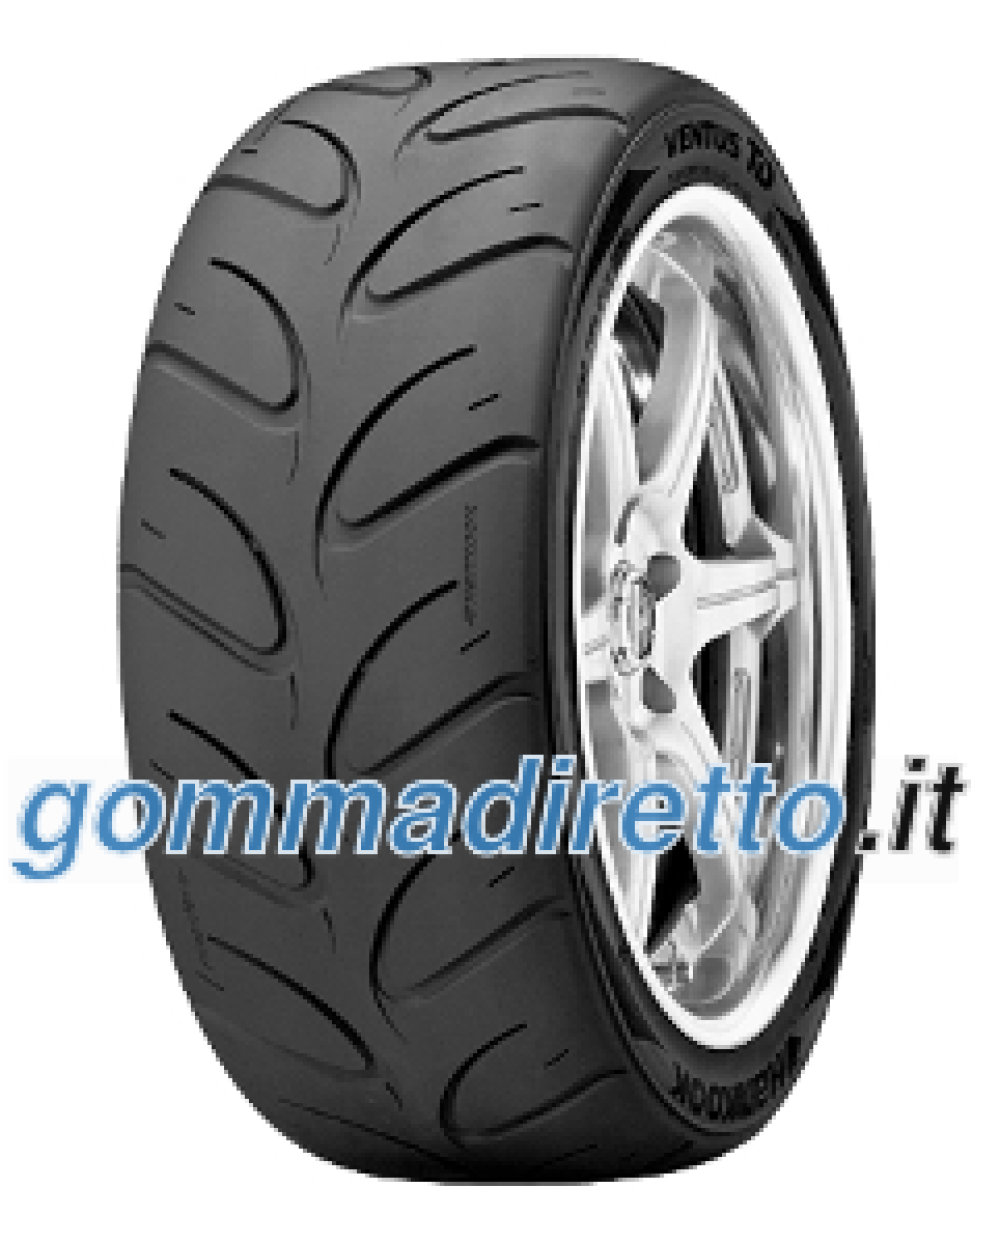 Image of Hankook Ventus TD Z221 ( P225/35 R18 87Y XL 4PR *, Competition Use Only SBL )